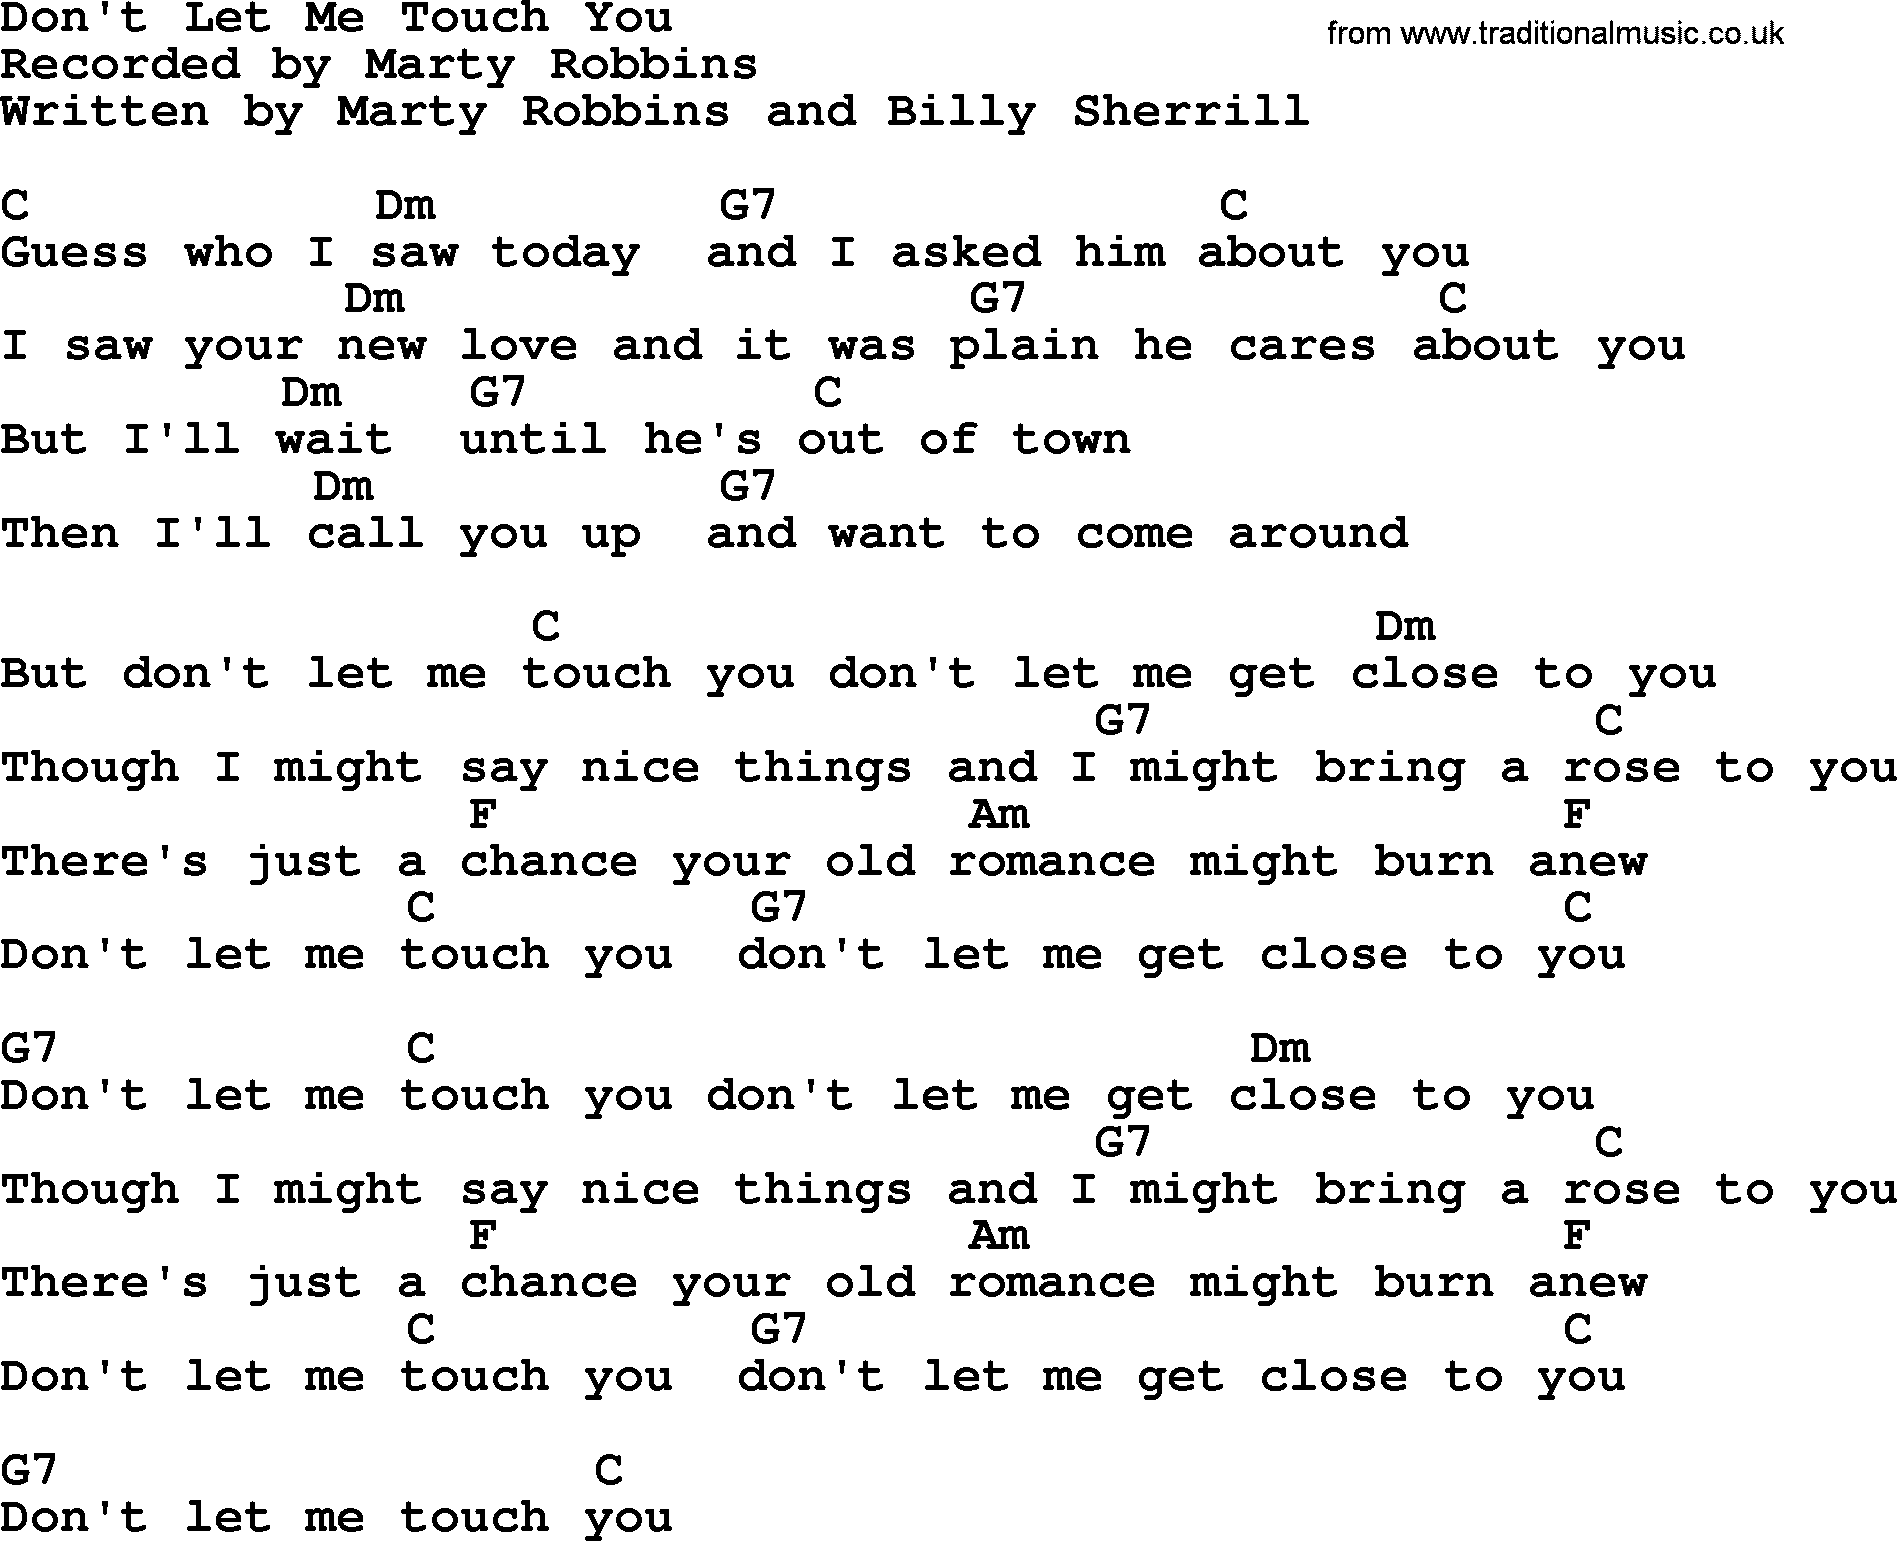 Marty Robbins song: Don't Let Me Touch You, lyrics and chords